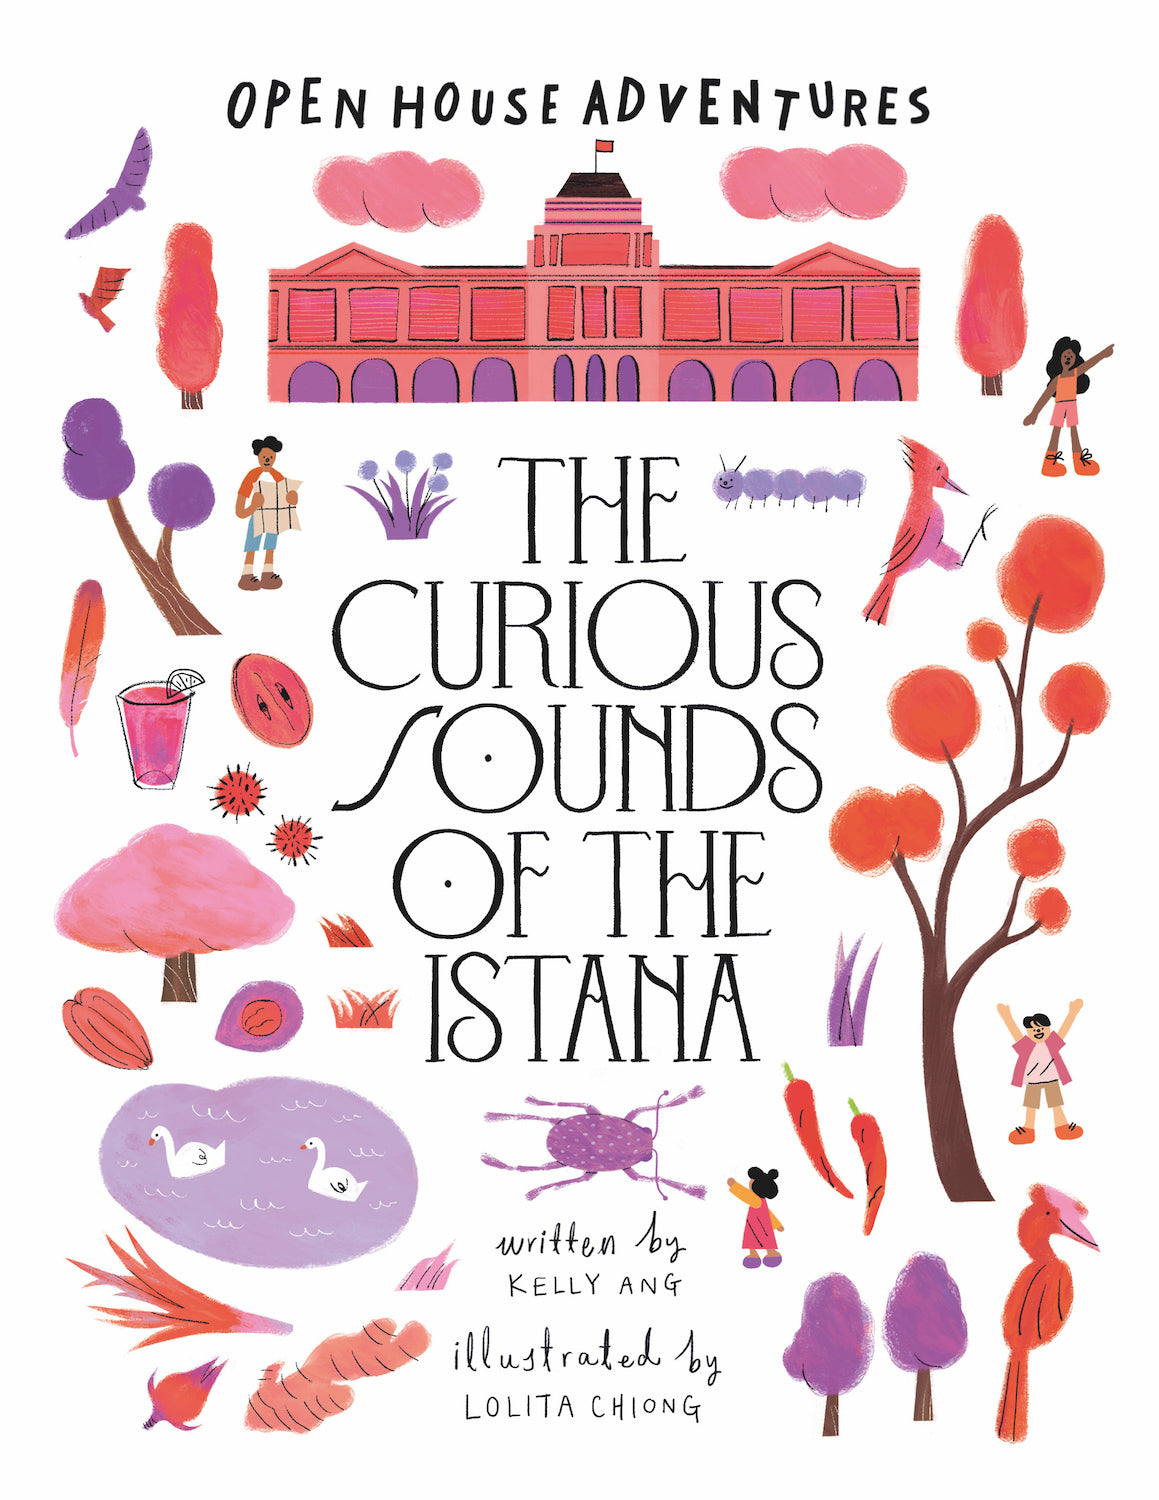 The Curious Sounds of the Istana